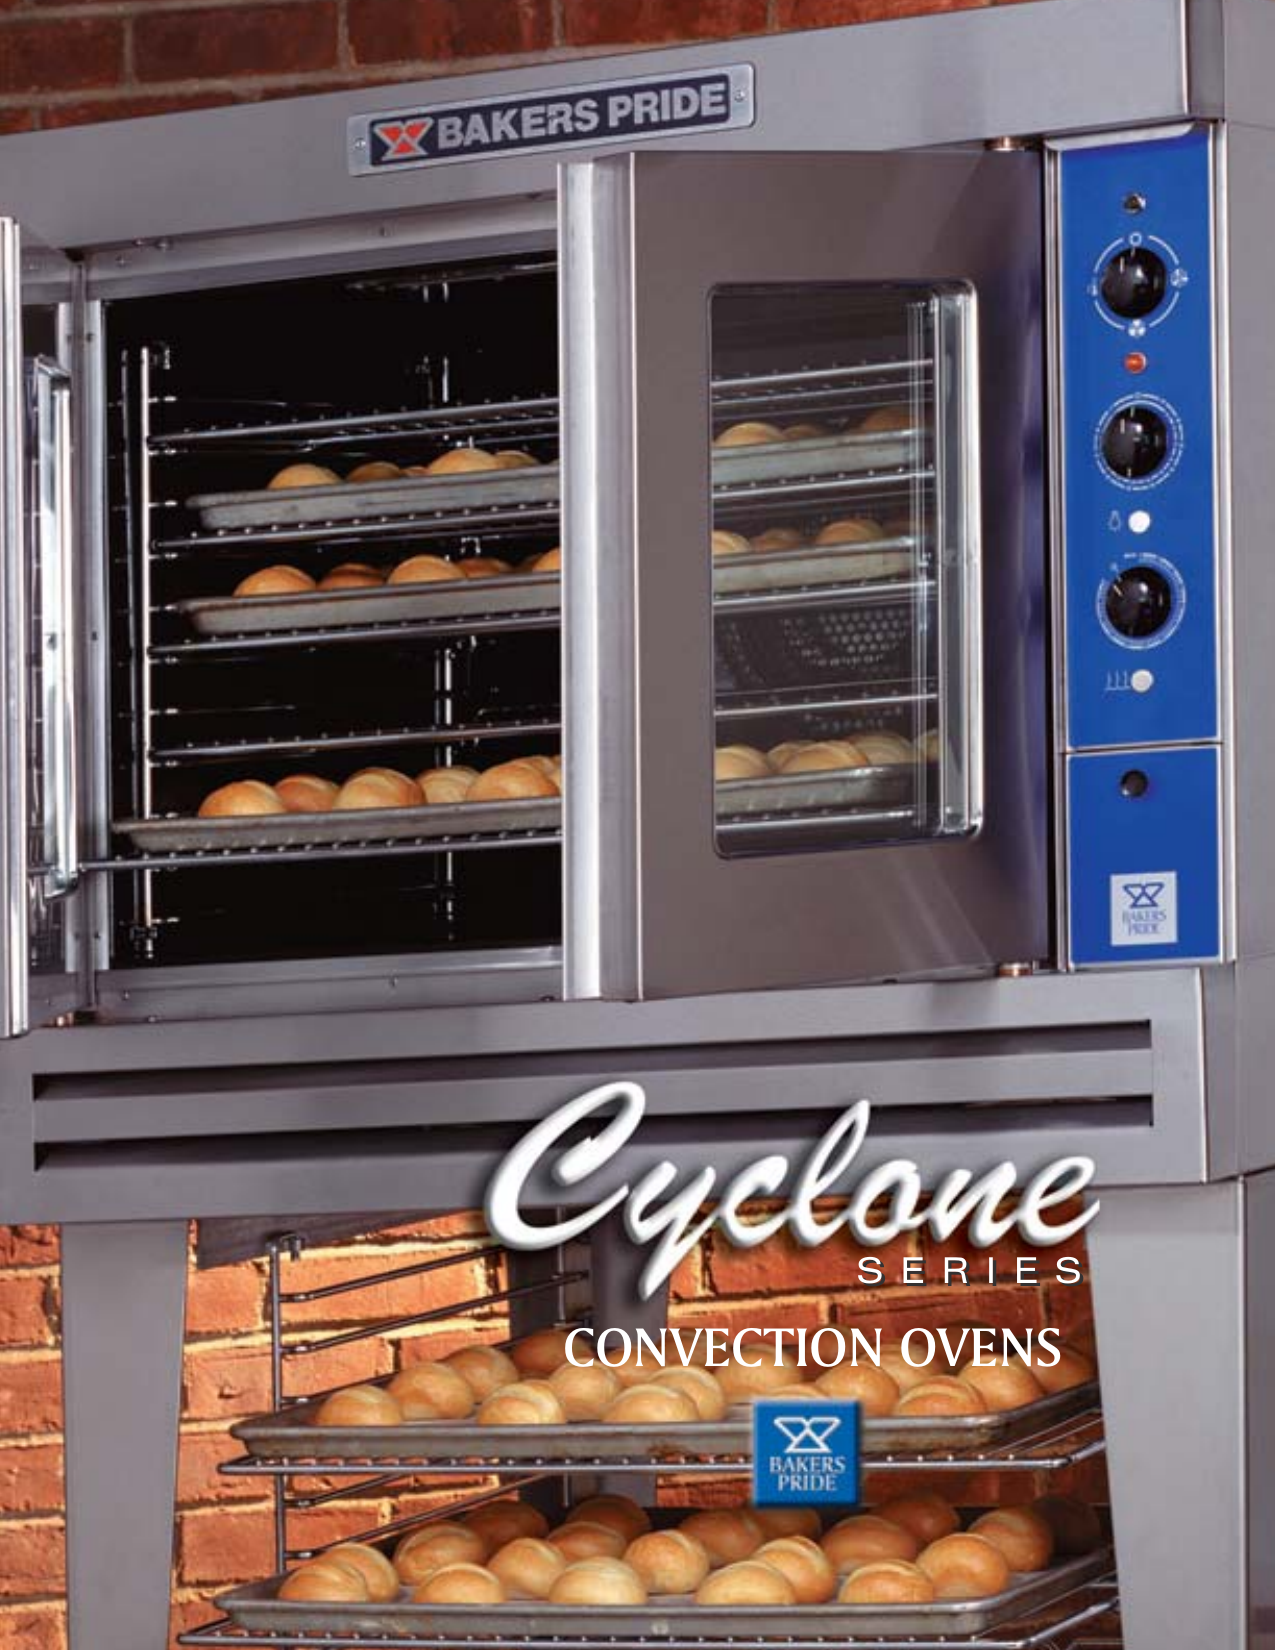 Page 1 of 8 - Bakers-Pride-Oven Bakers-Pride-Oven-Co11-Users-Manual- Cyclone Brochure 2006  Bakers-pride-oven-co11-users-manual